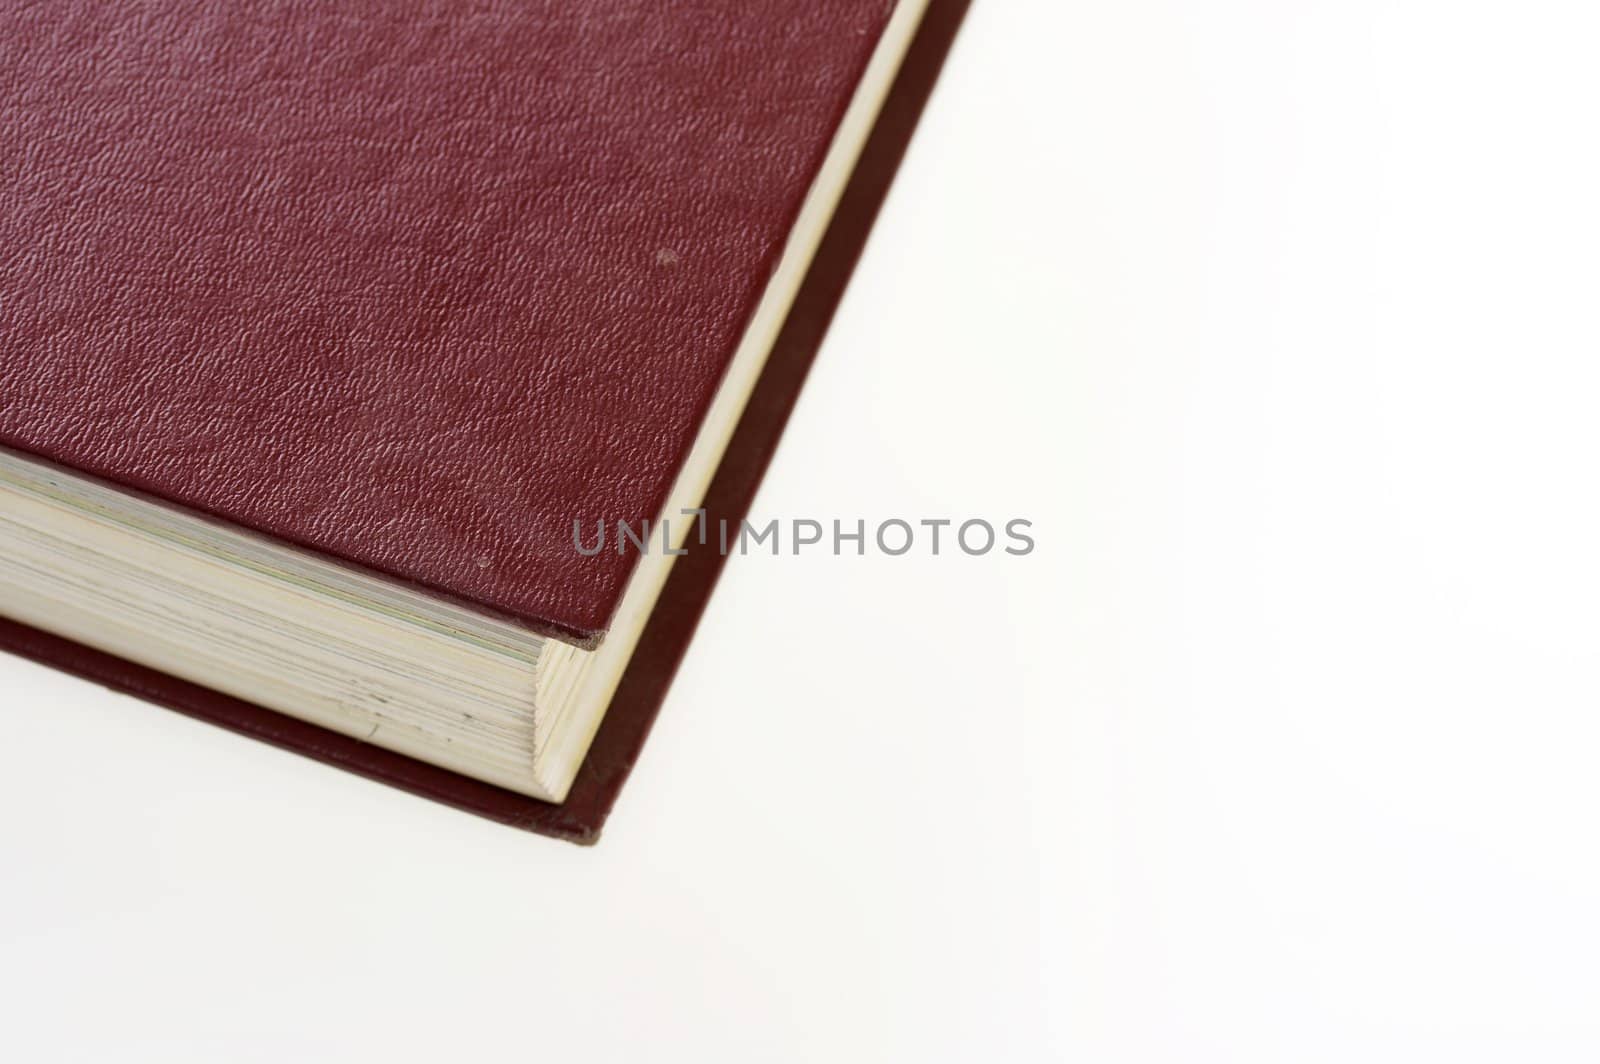 a macro picture of a single book